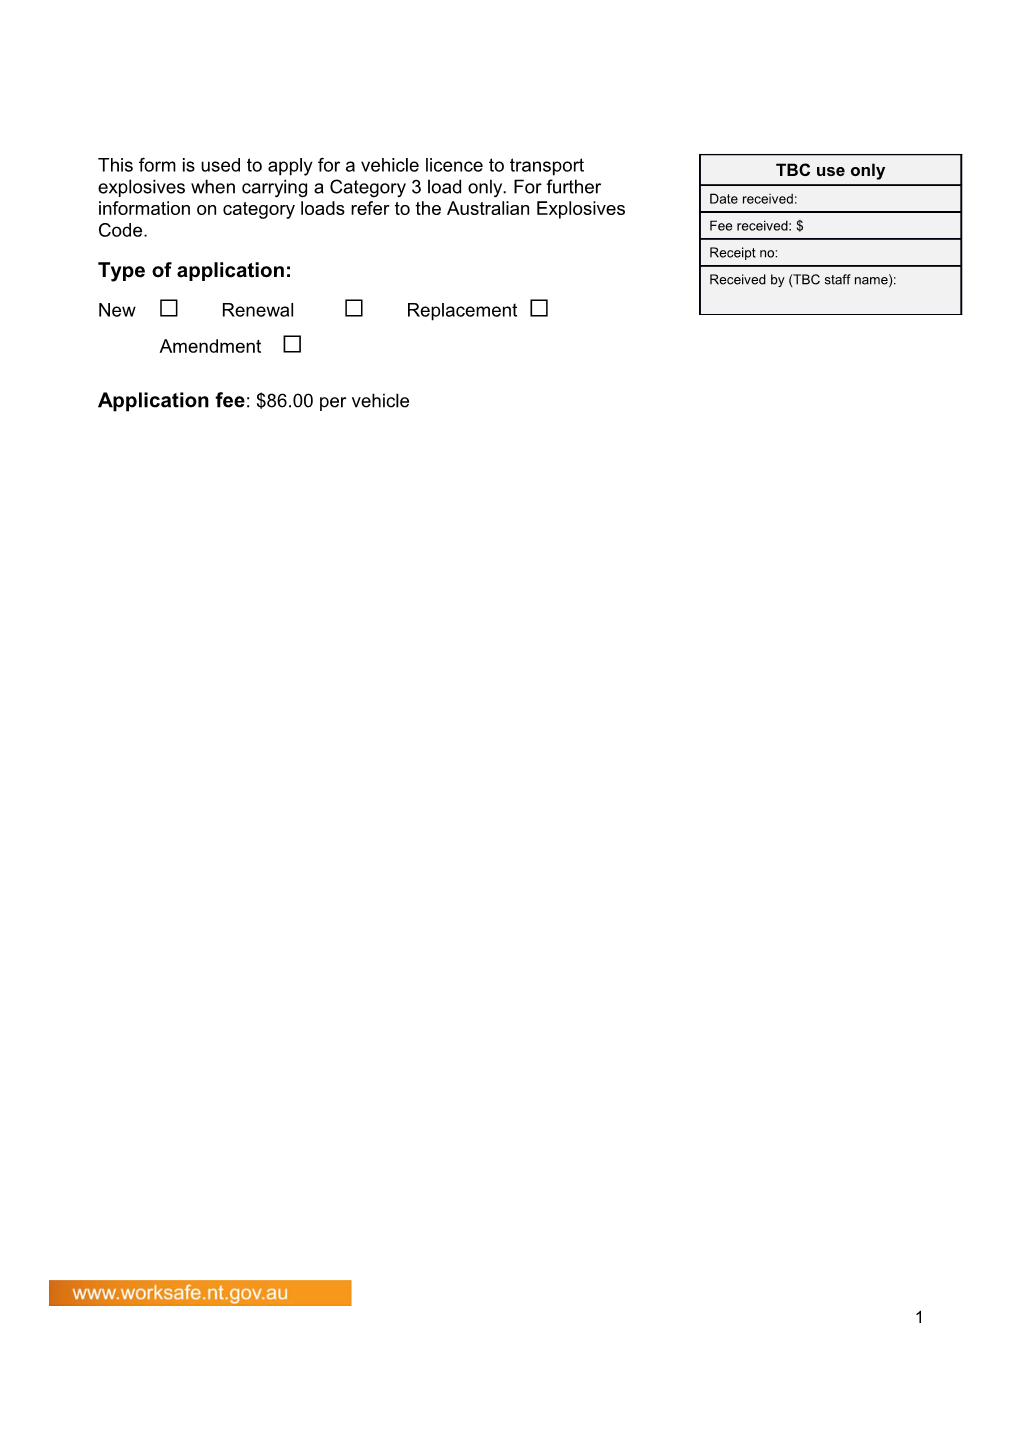 Application for a Vehicle Licence to Transport Explosives